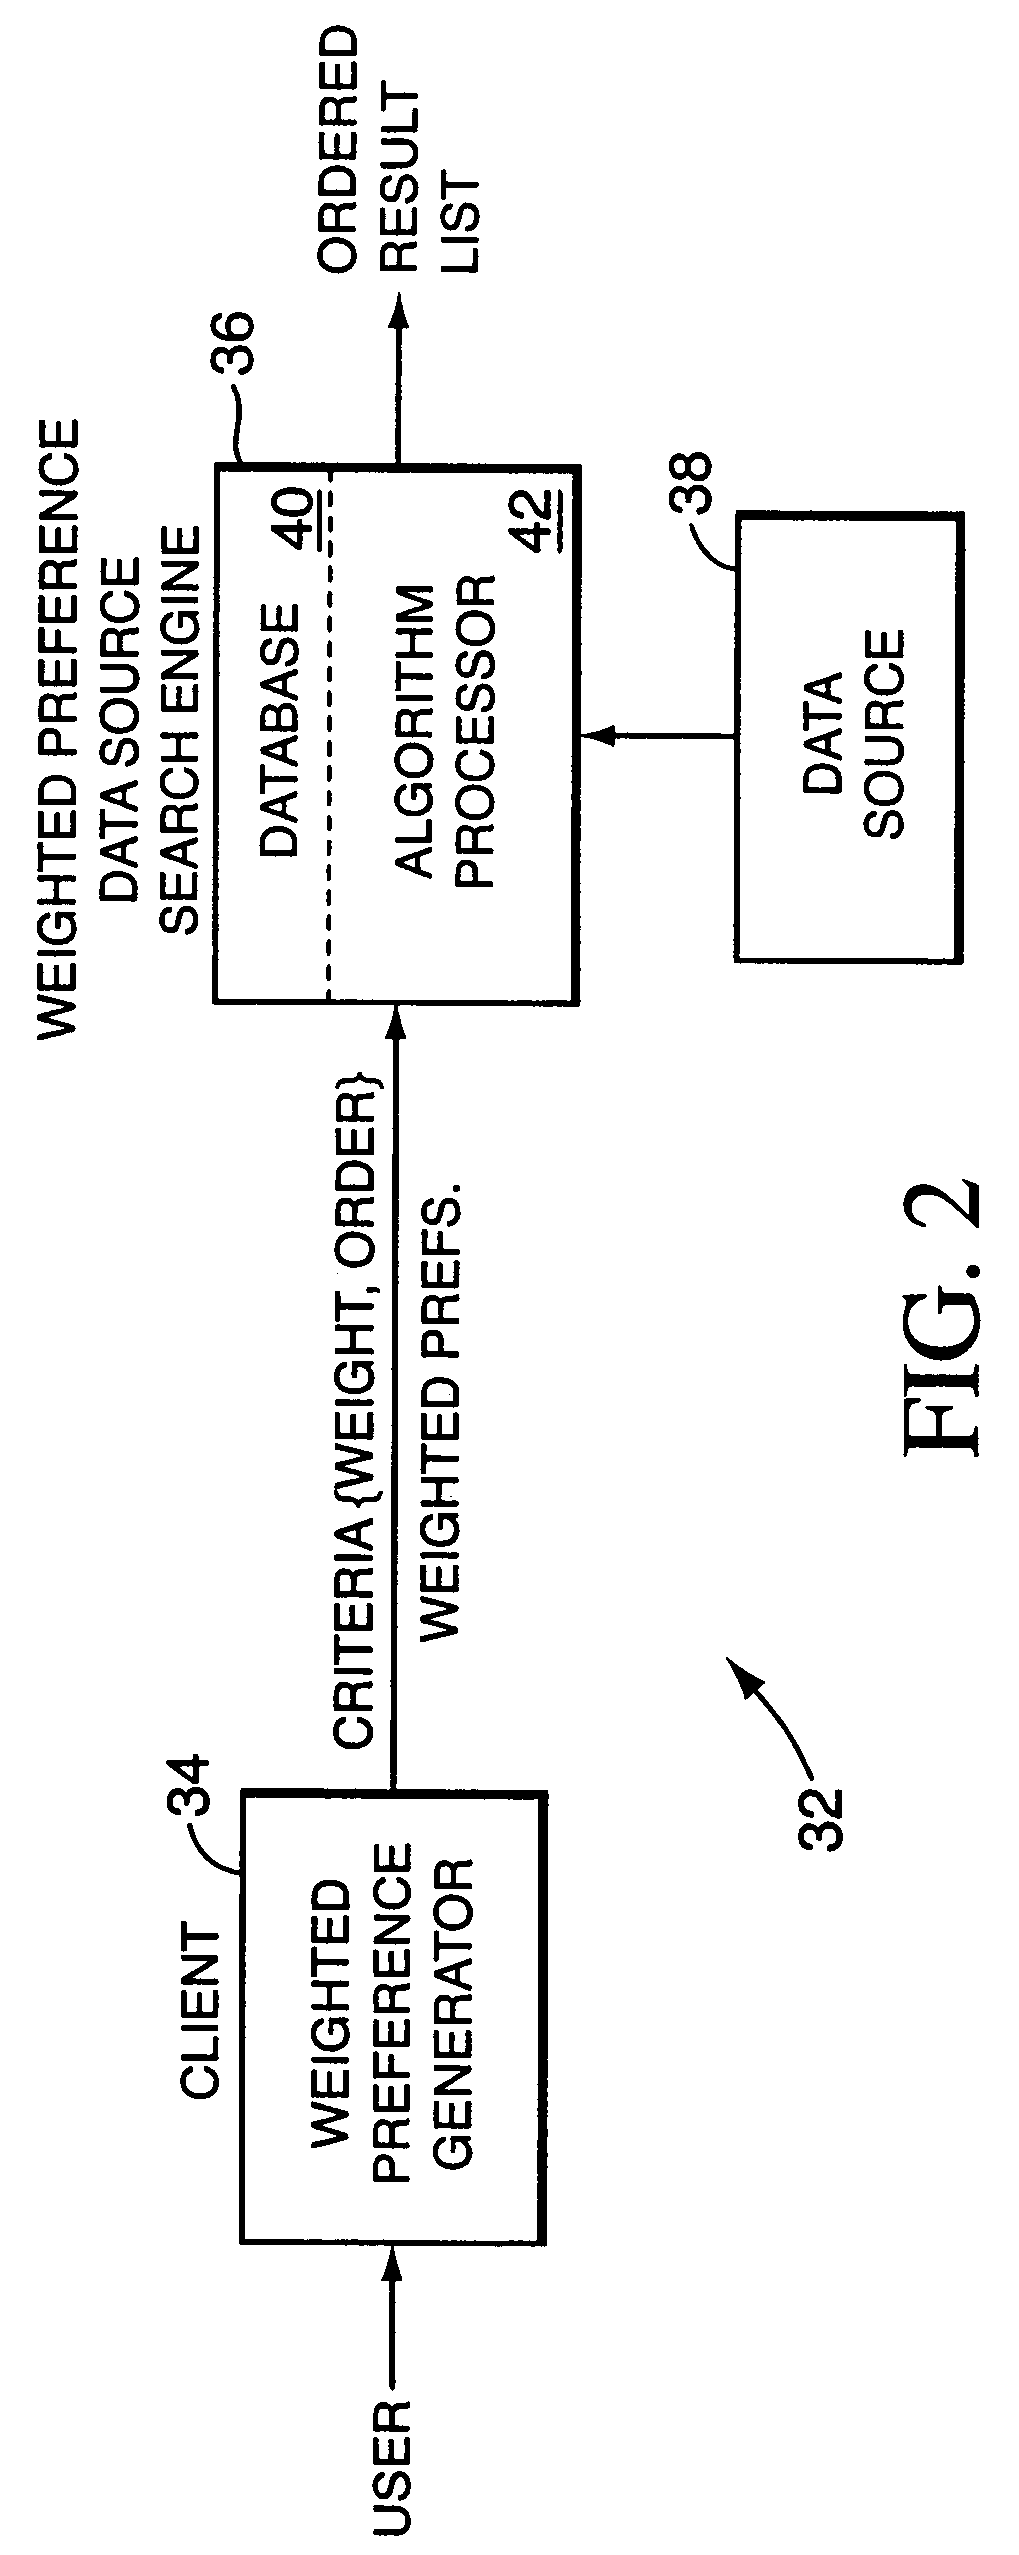 Weighted preference data search system and method